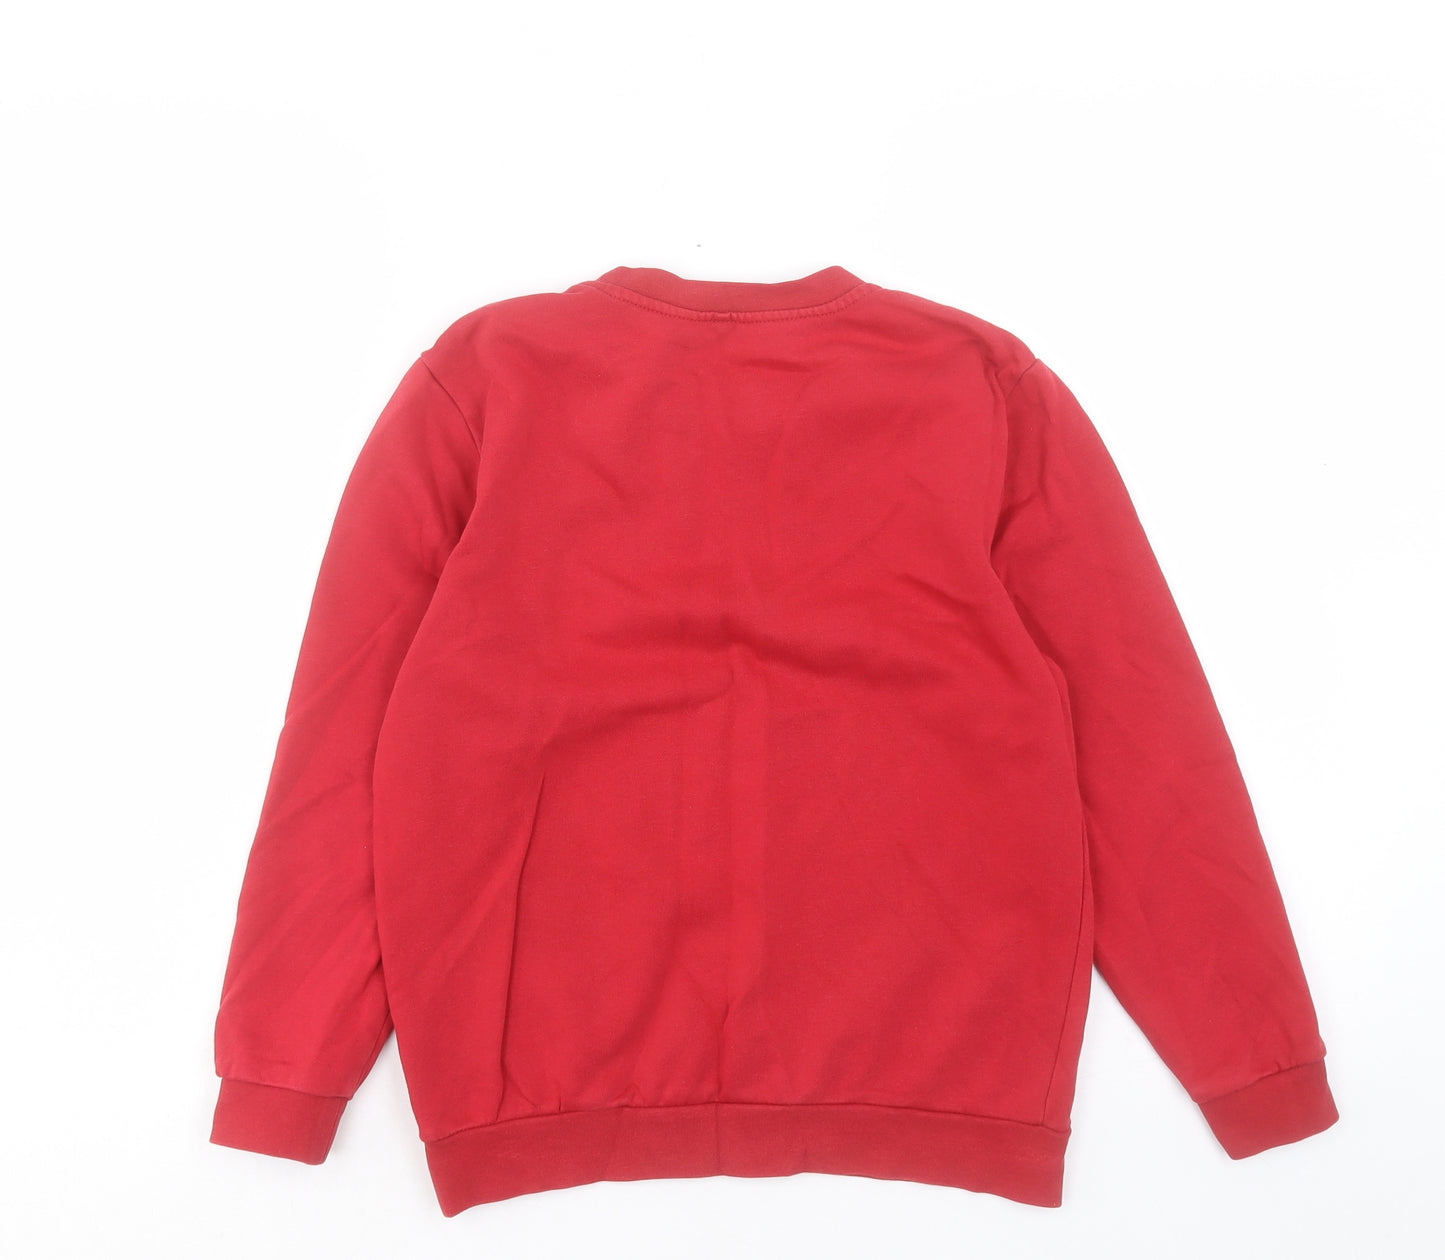 George Boys Red Cotton Pullover Sweatshirt Size 9-10 Years Pullover - School Wear